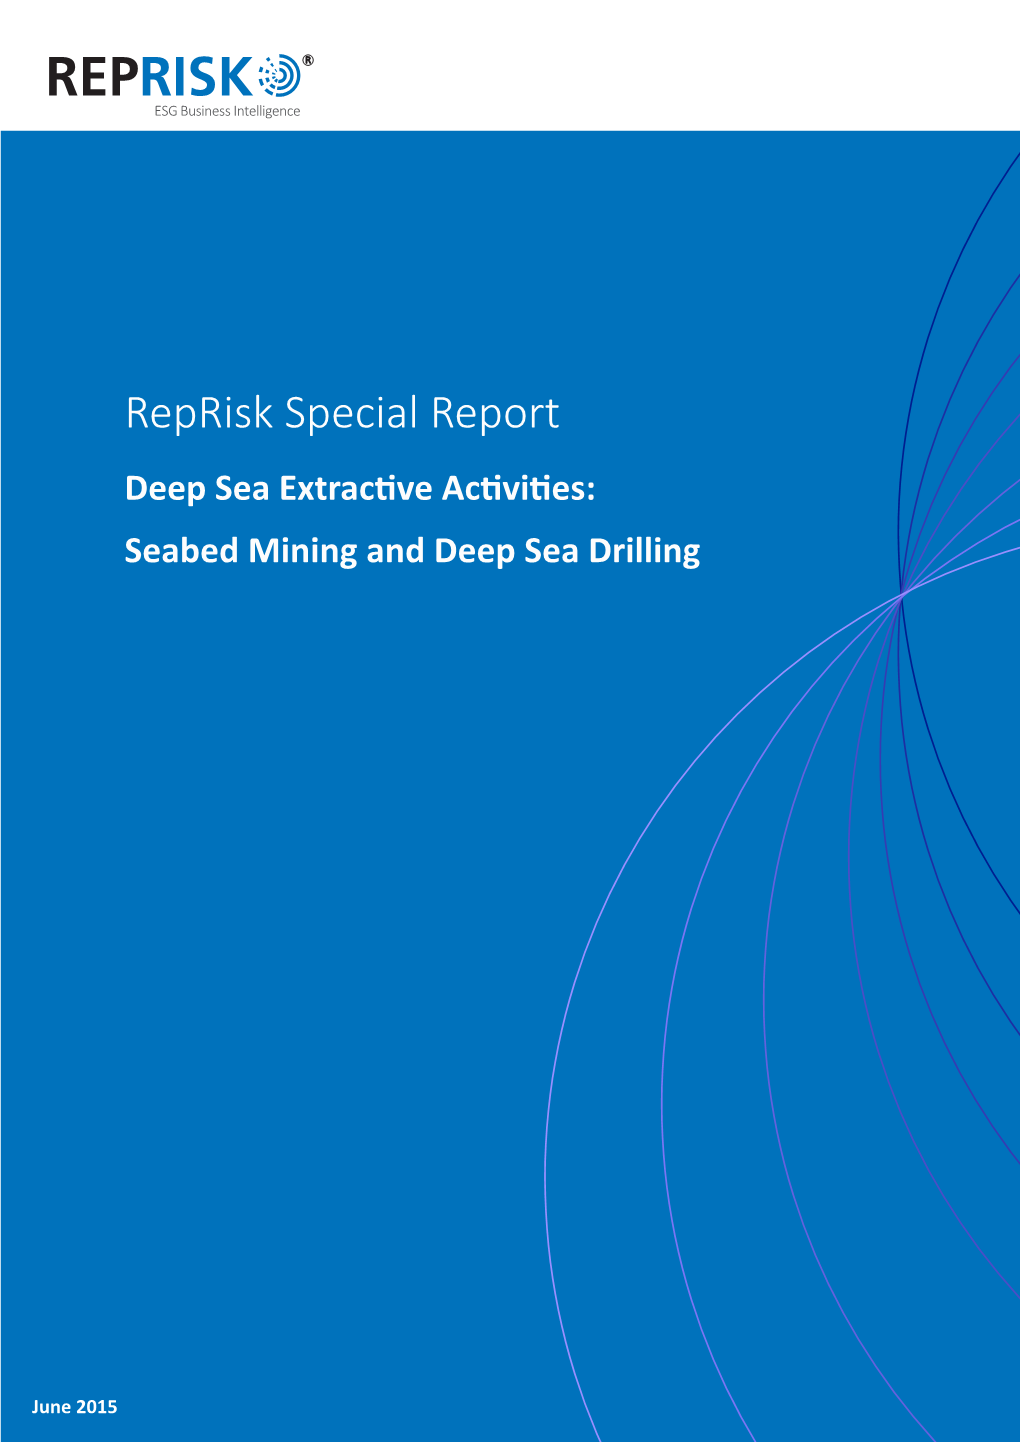 Reprisk Special Report Deep Sea Extractive Activities: Seabed Mining and Deep Sea Drilling